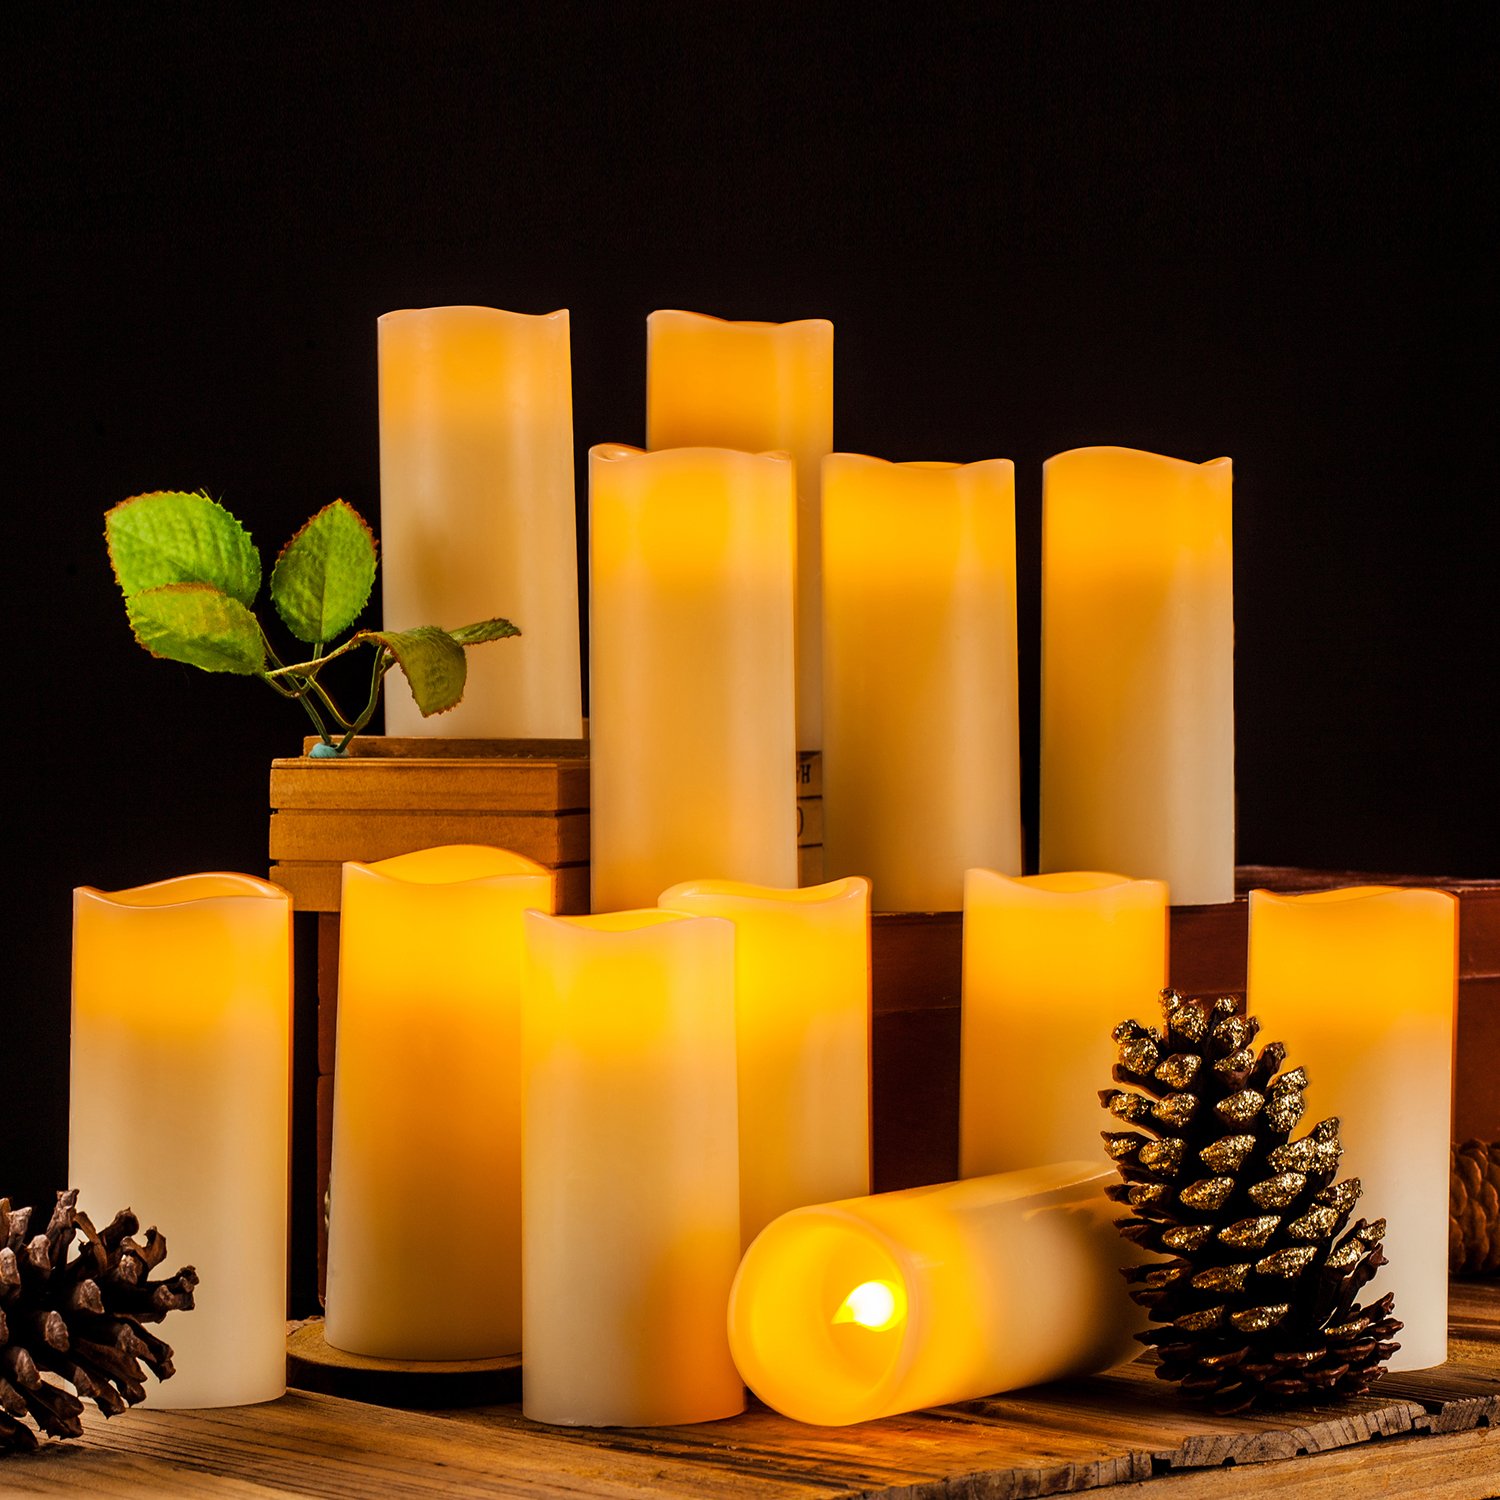 Enpornk Flameless Candles Flickering LED Candles Set of 12 (D:2.2" X H:5") Ivory Real Wax Pillar Battery Opeated Candles with 10-Key Remote and Cycling 24 Hours Timer